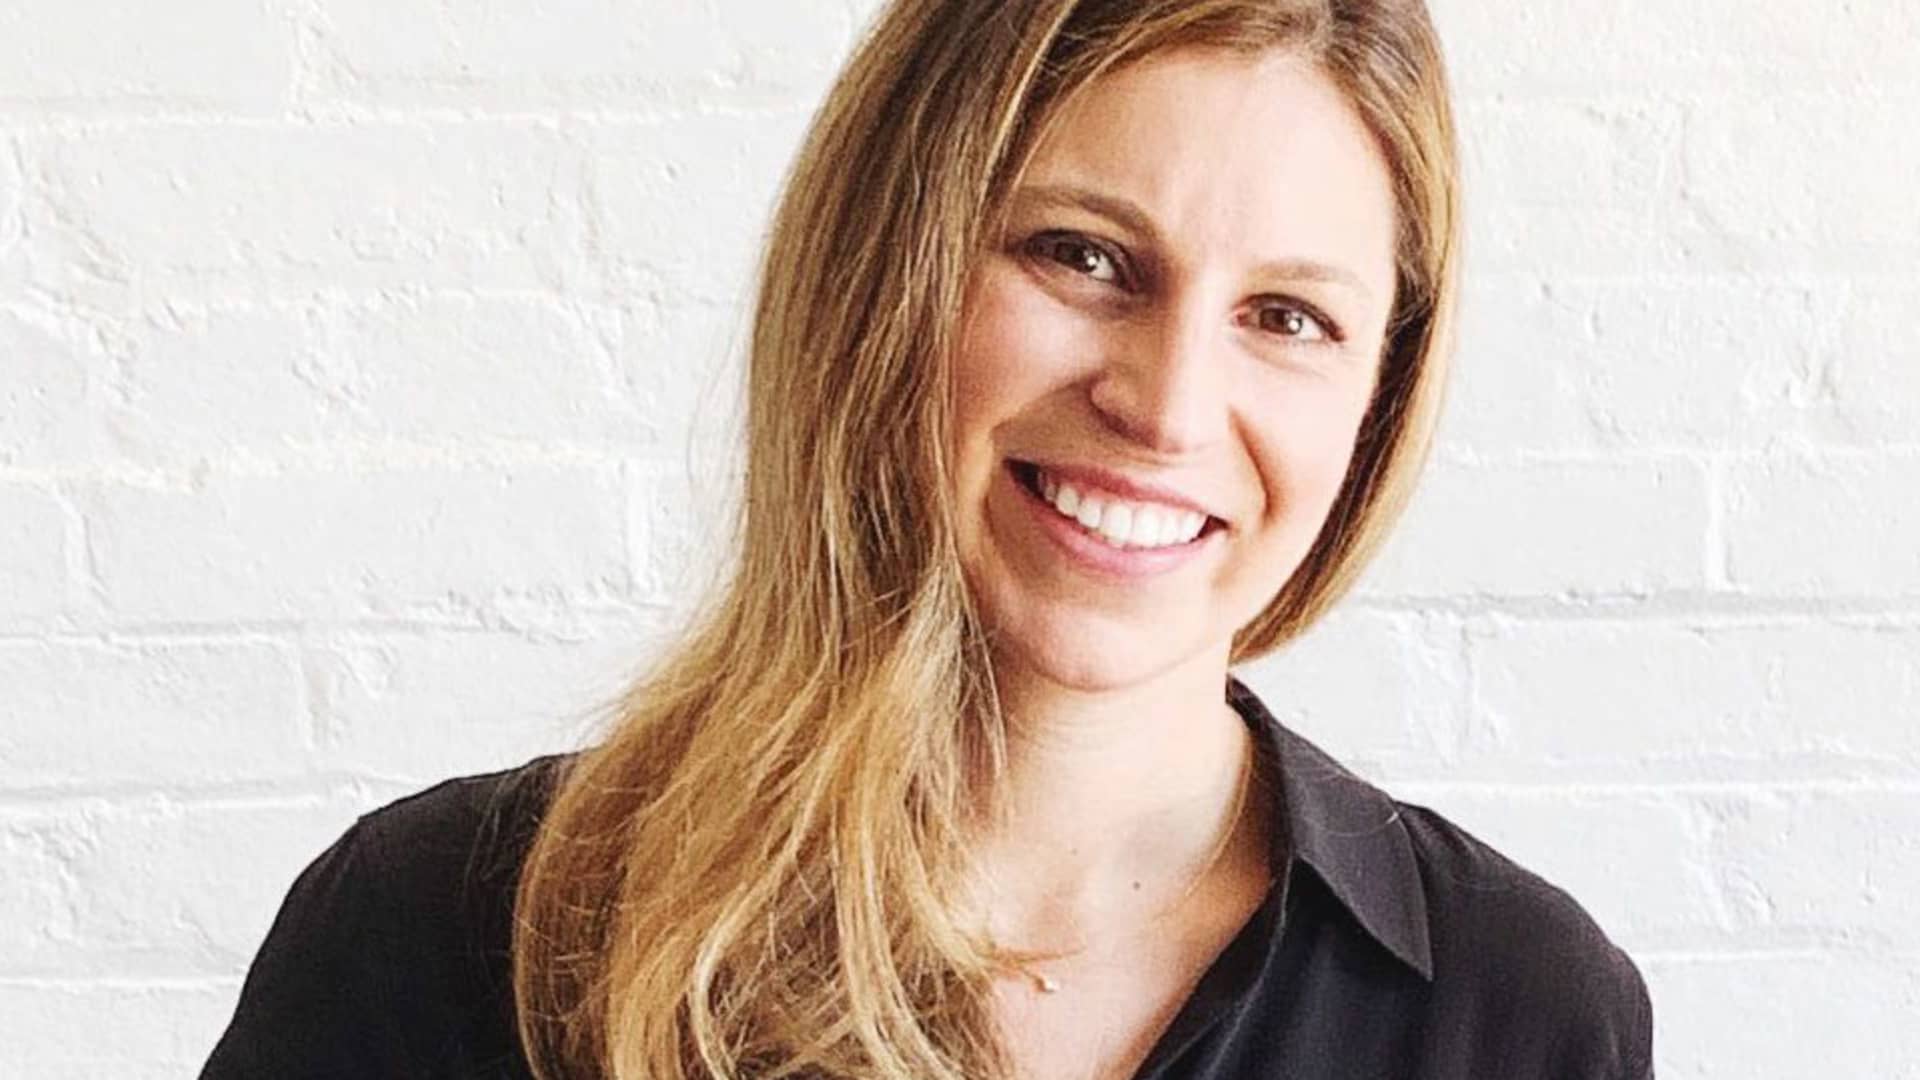 Cure Hydration founder and CEO Lauren Picasso had to come up creative ways to get the company's fruit-flavored products into shoppers' baskets because of the pandemic.